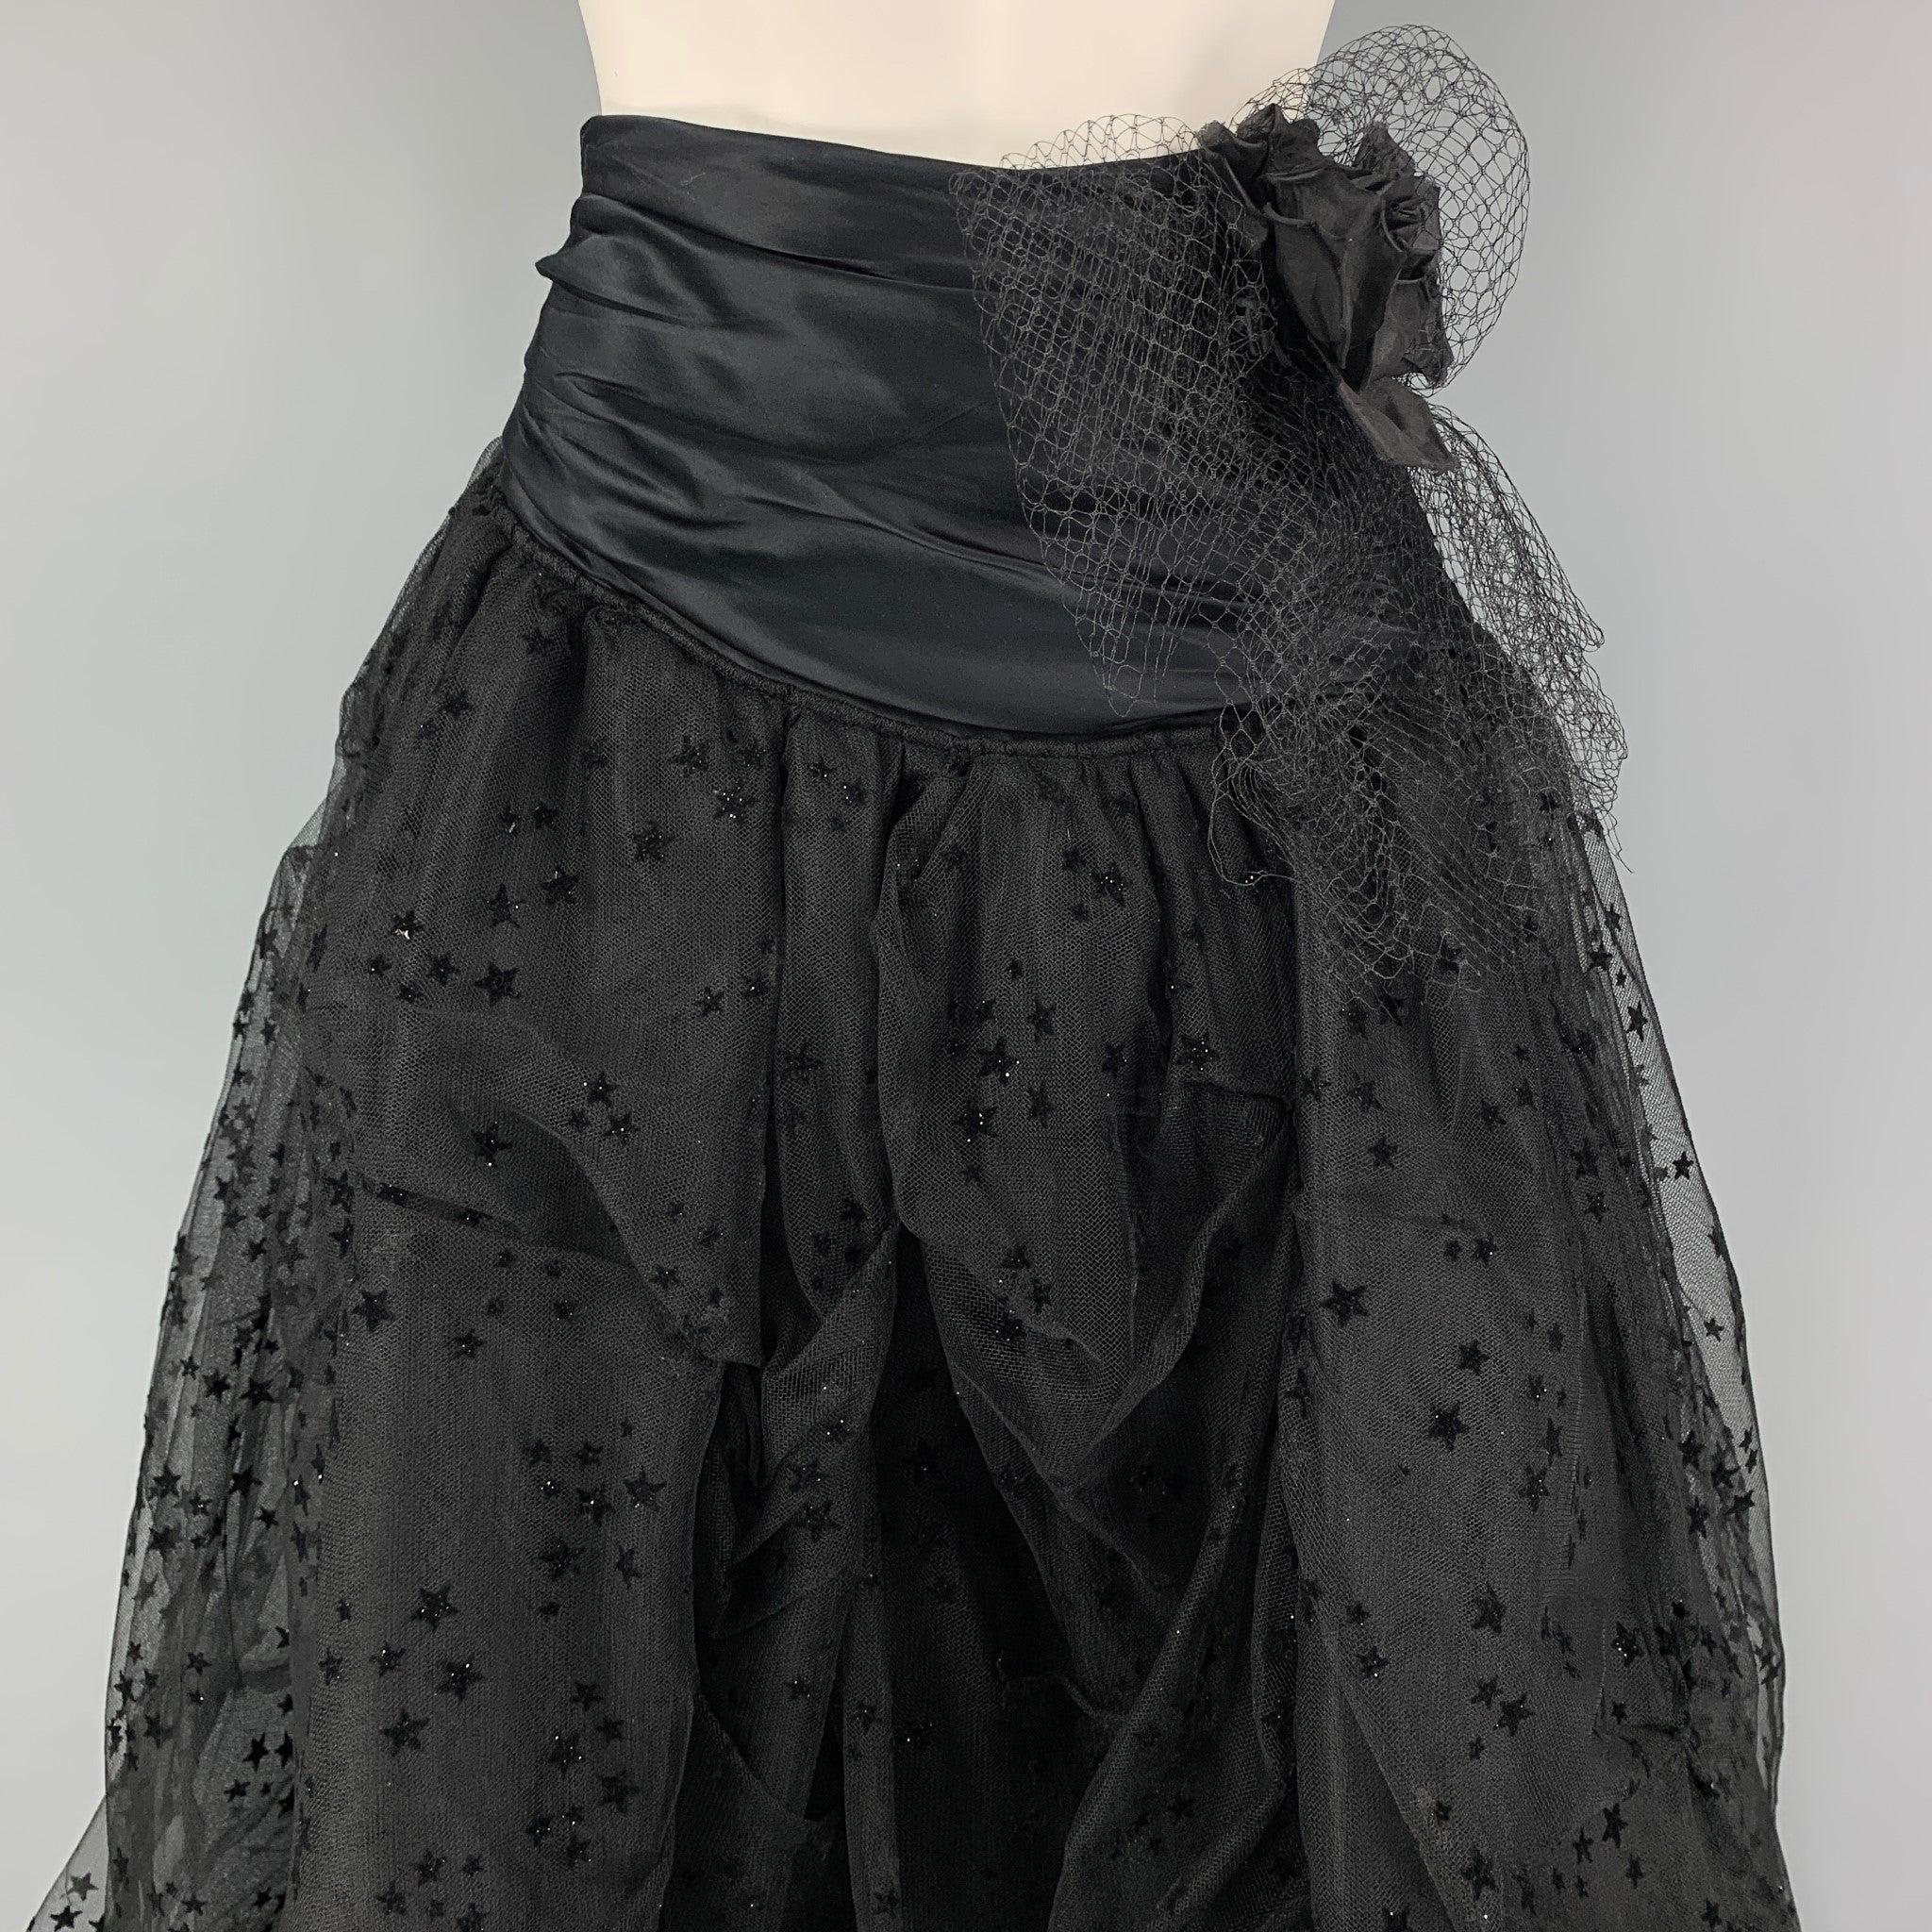 FAITH CONNEXION skirt comes in a black mixed fabrics with a mesh overlay featuring stat details, ruffled flower design, high waisted, and a side hook & loop closure.
Excellent
Pre-Owned Condition. 

Marked:   38 

Measurements: 
  Waist: 26 inches